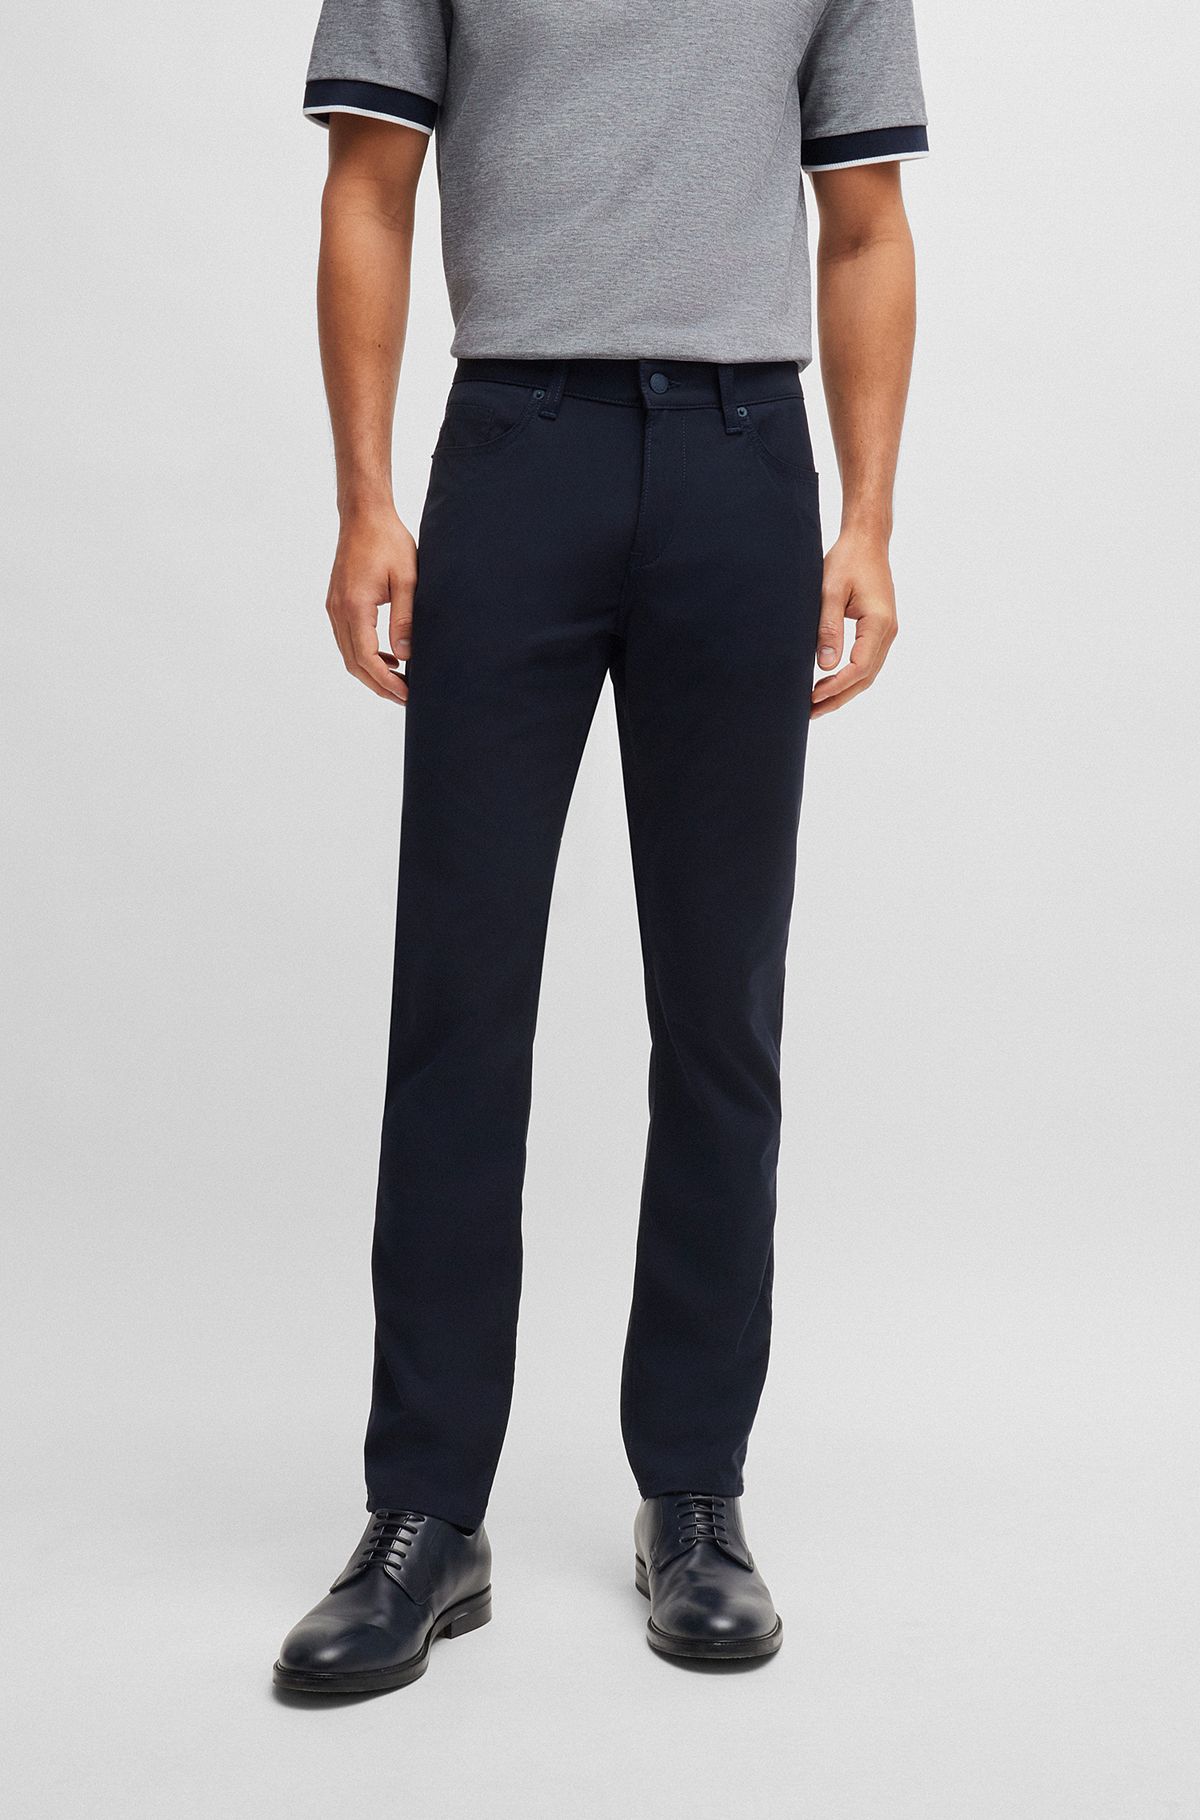 Delaware Slim-fit jeans in woven stretch material, Dark Blue